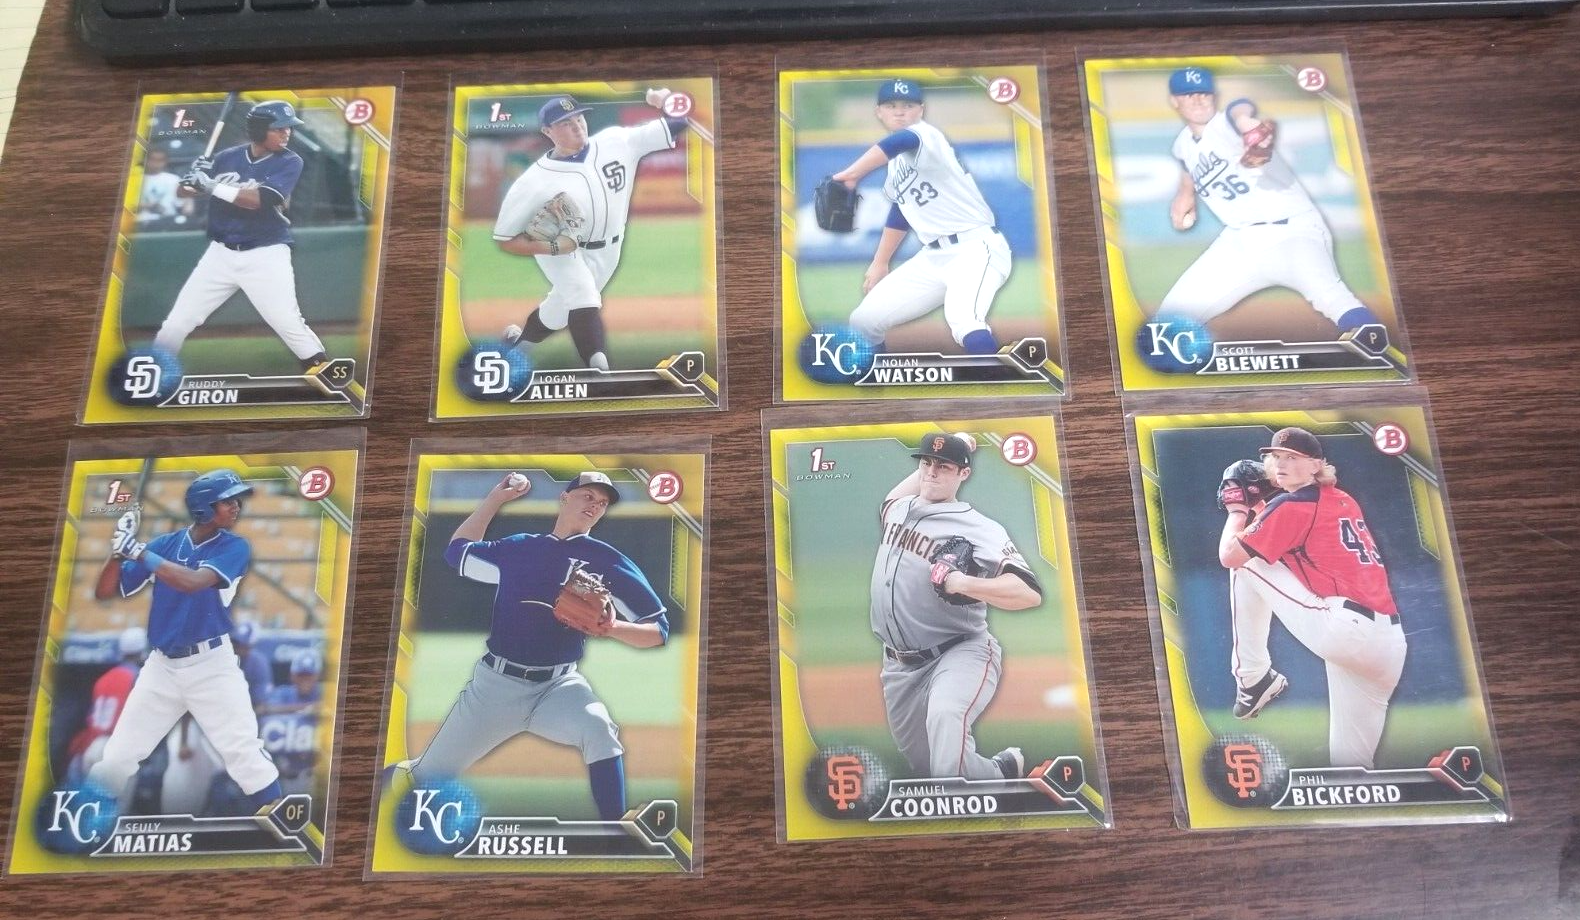 ASHE RUSSELL 2016 BOWMAN PROSPECT CARD #BP-75 ROYALS (ROOKIE YELLOW PARALLEL). rookie card picture